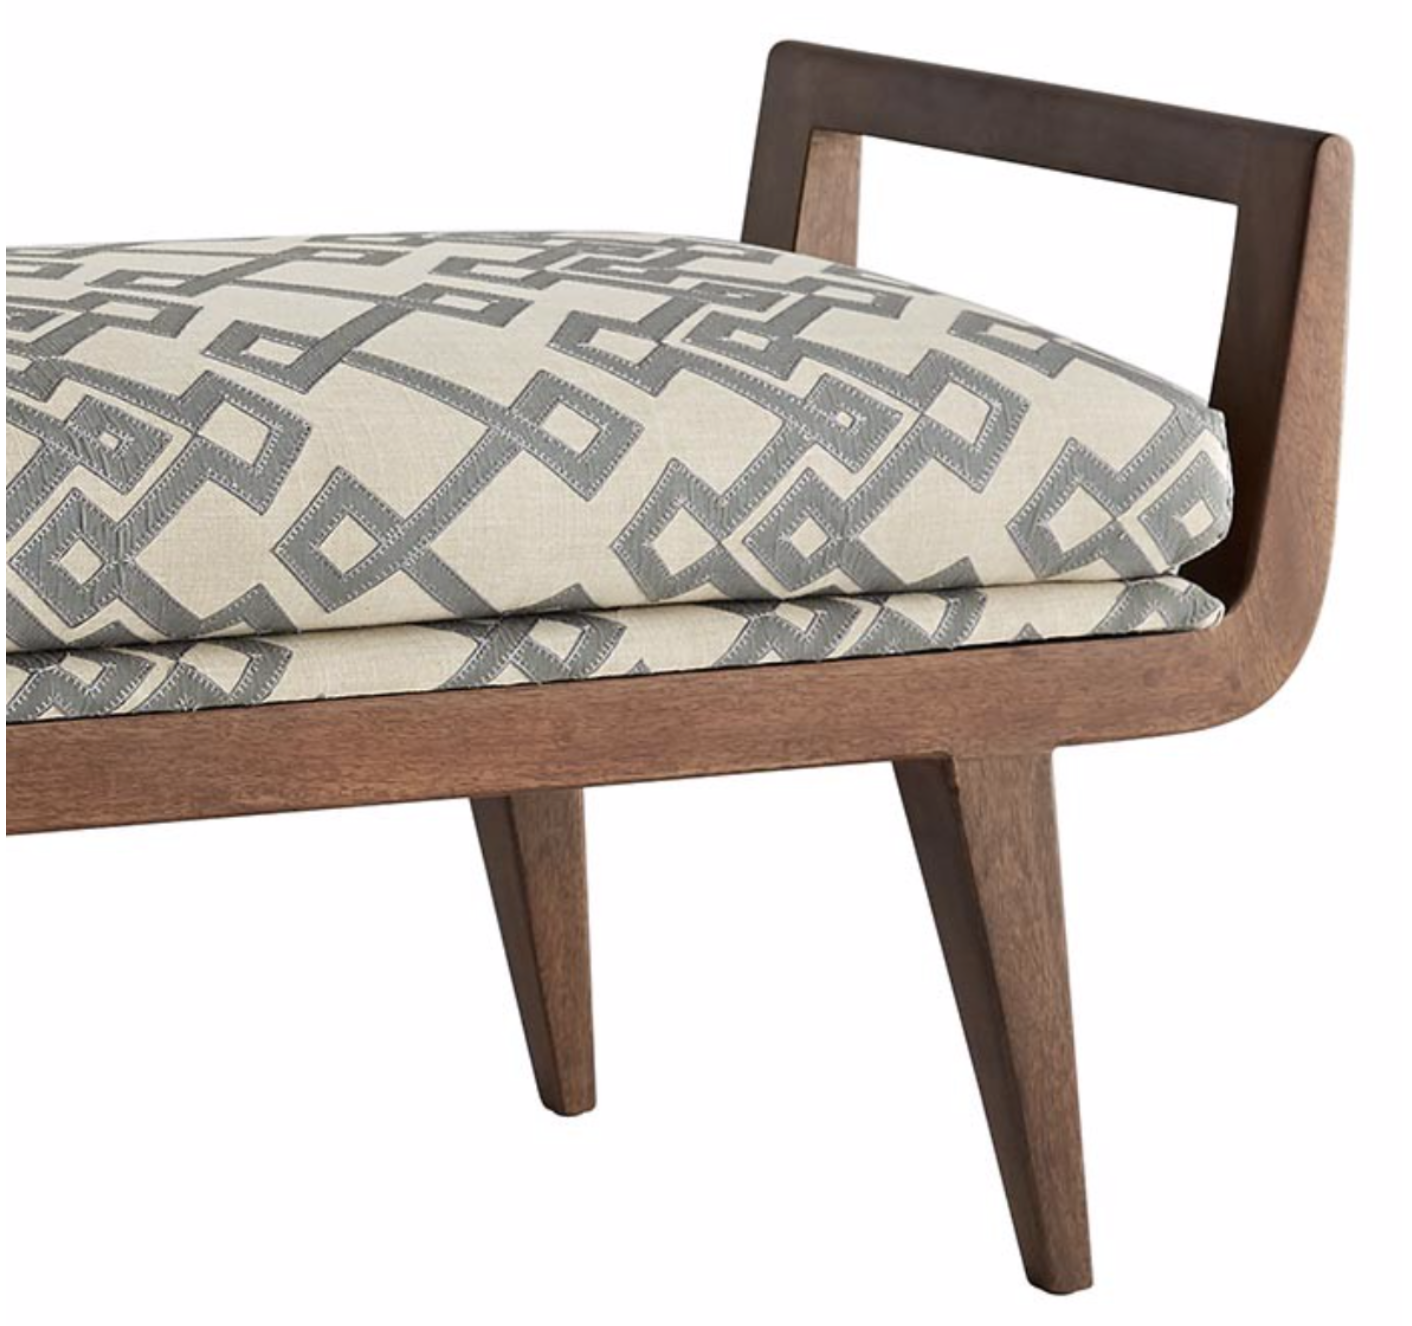 Cream and gray appliqué patterned bench with wood frame and handles